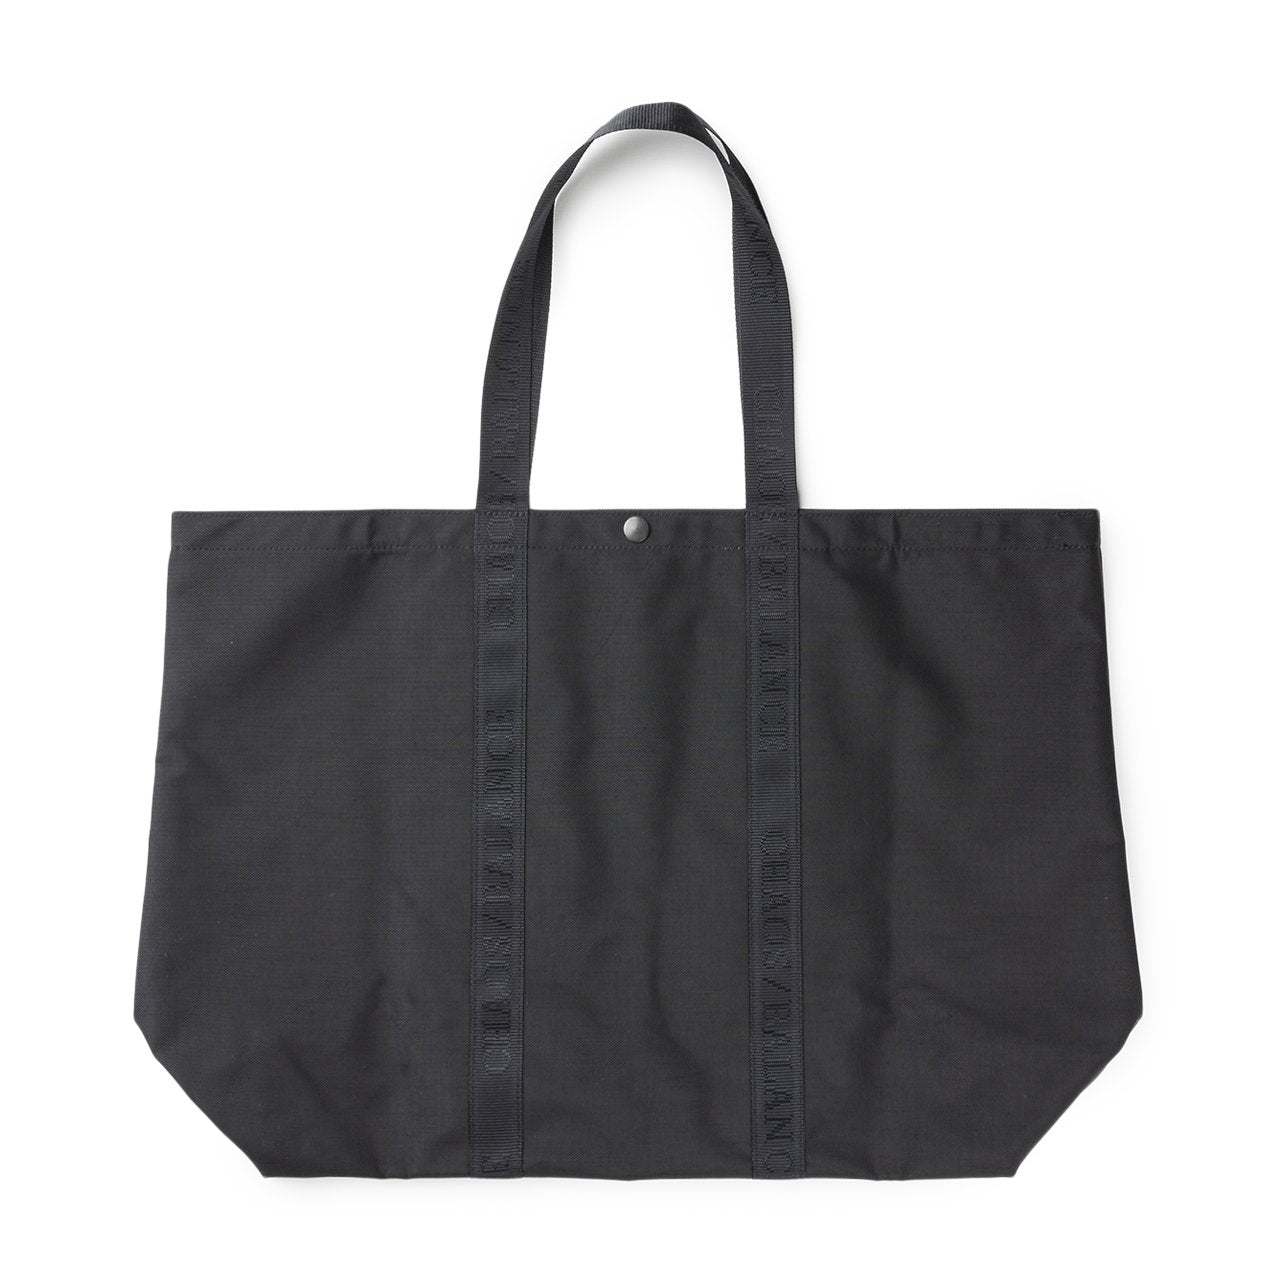 undercover undercover logo tote bag large (black) UCZ4B11